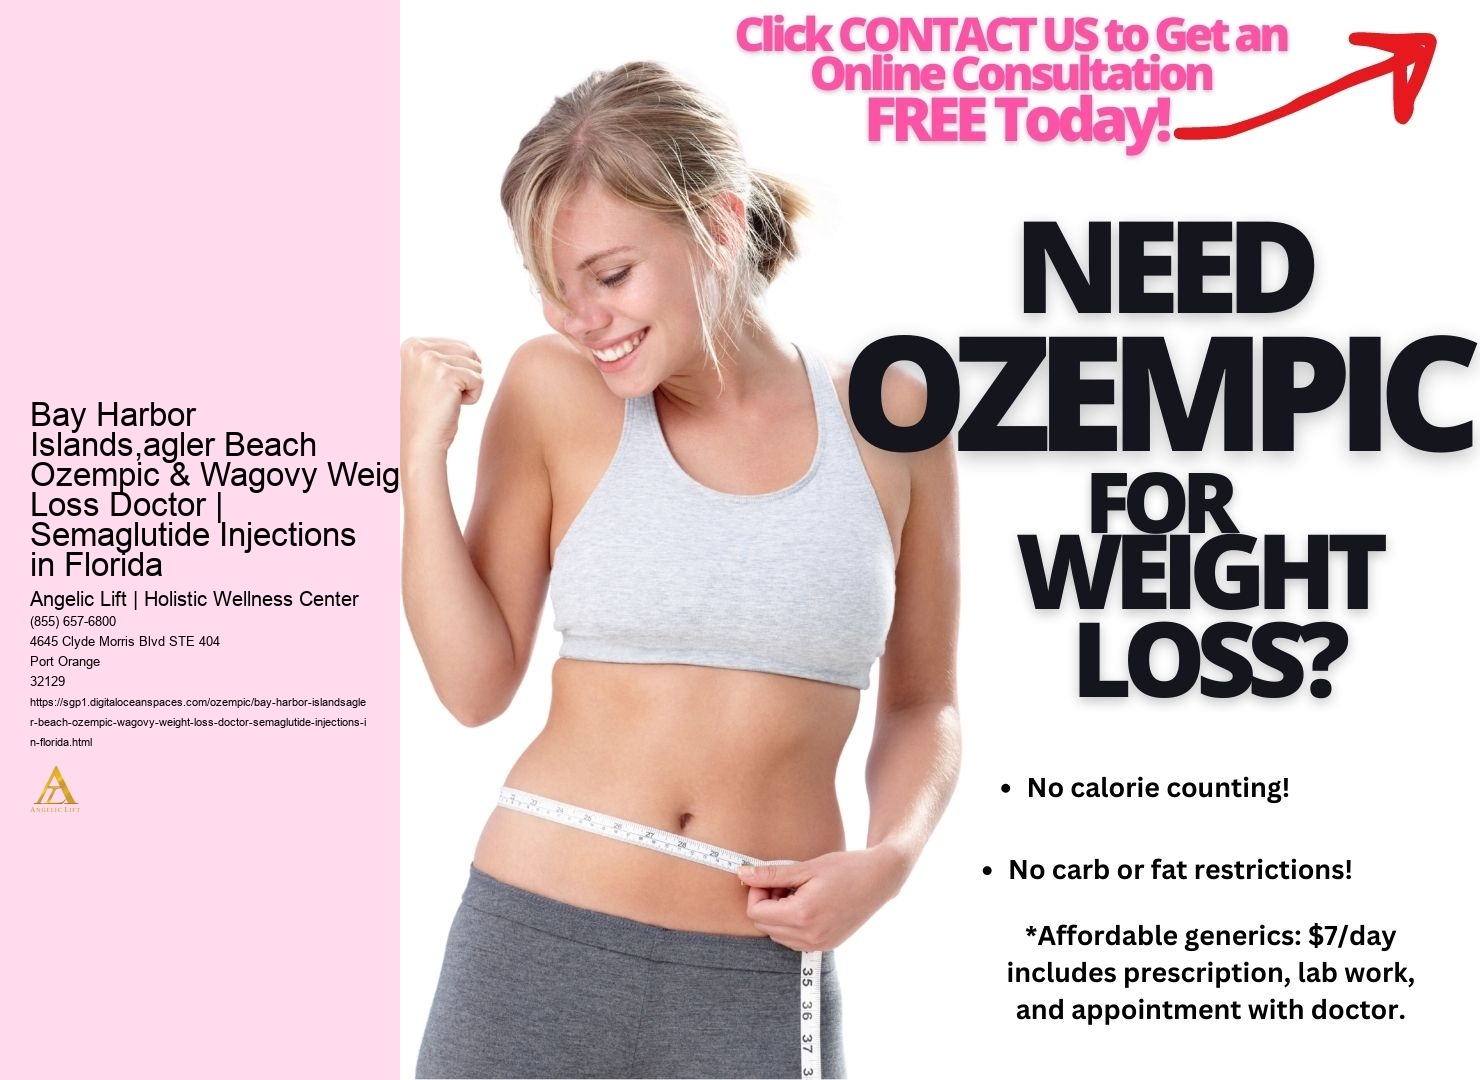 Bay Harbor Islands,agler Beach Ozempic & Wagovy Weight Loss Doctor | Semaglutide Injections in Florida